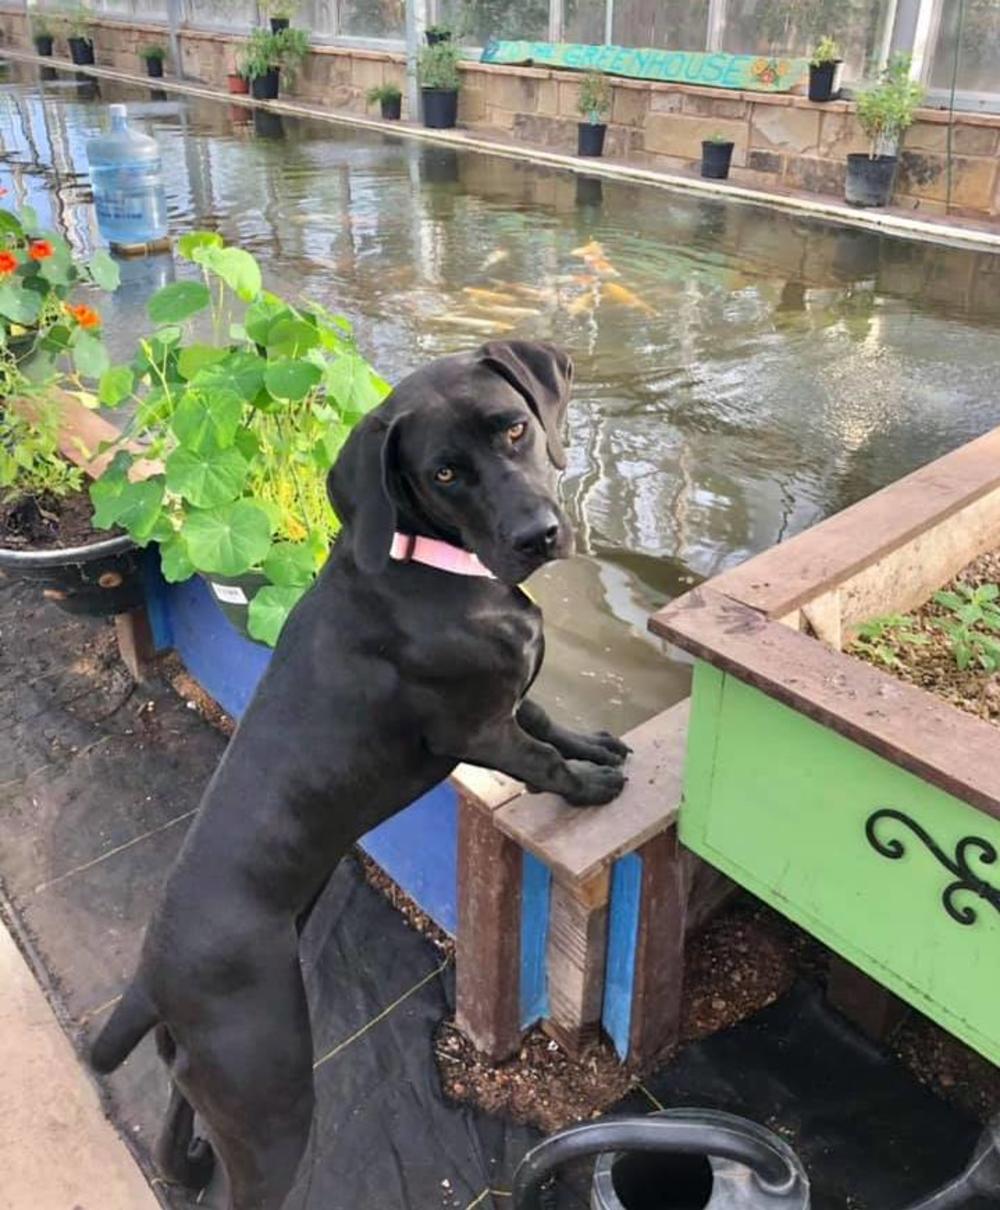 Dog at the Community Gardens